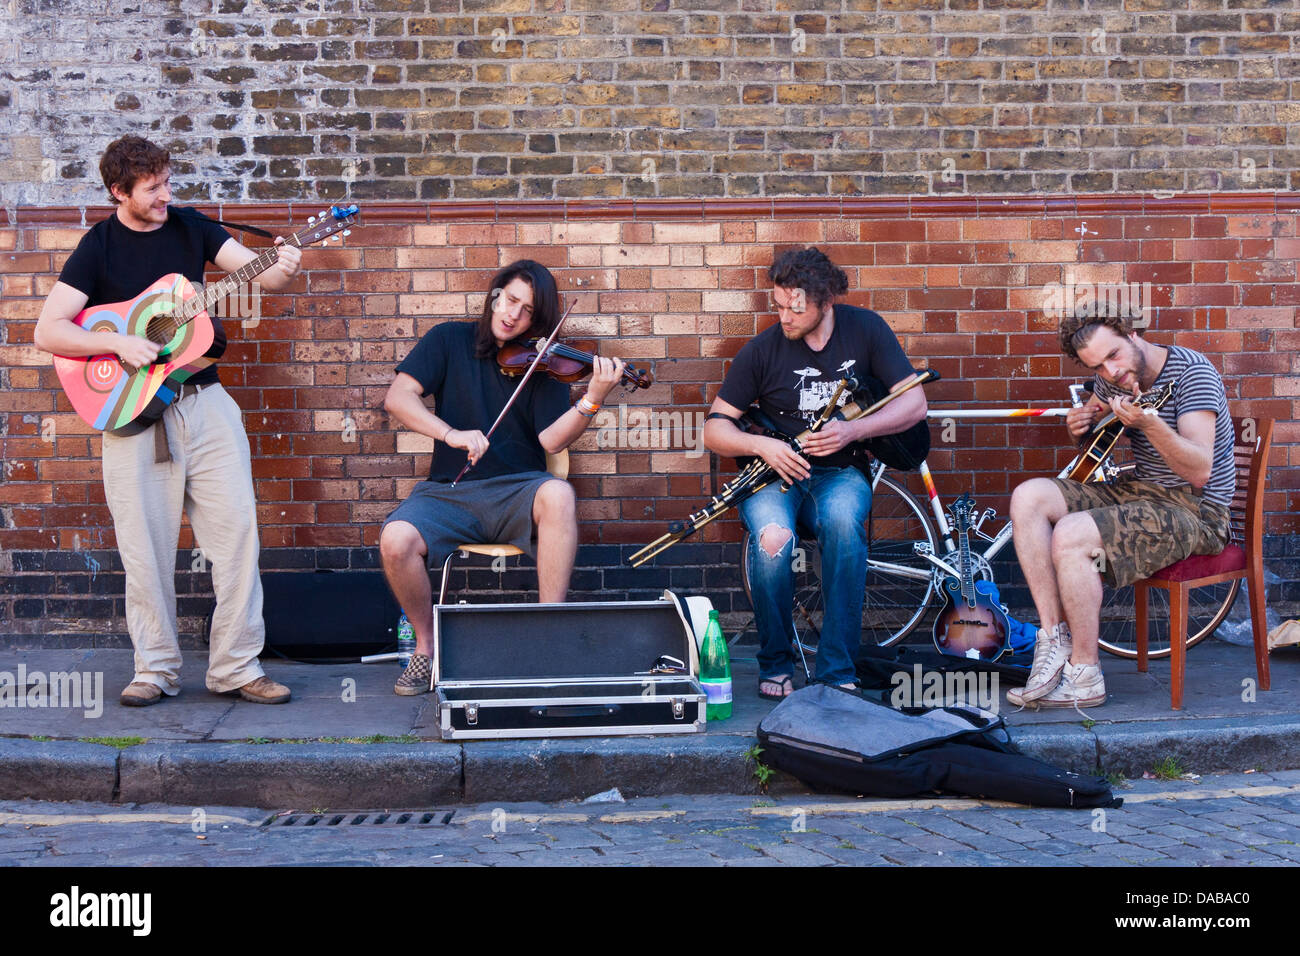 A band of young buskers perform on the streets of London at Columbia Road flower market, London, England, GB, UK. Stock Photo